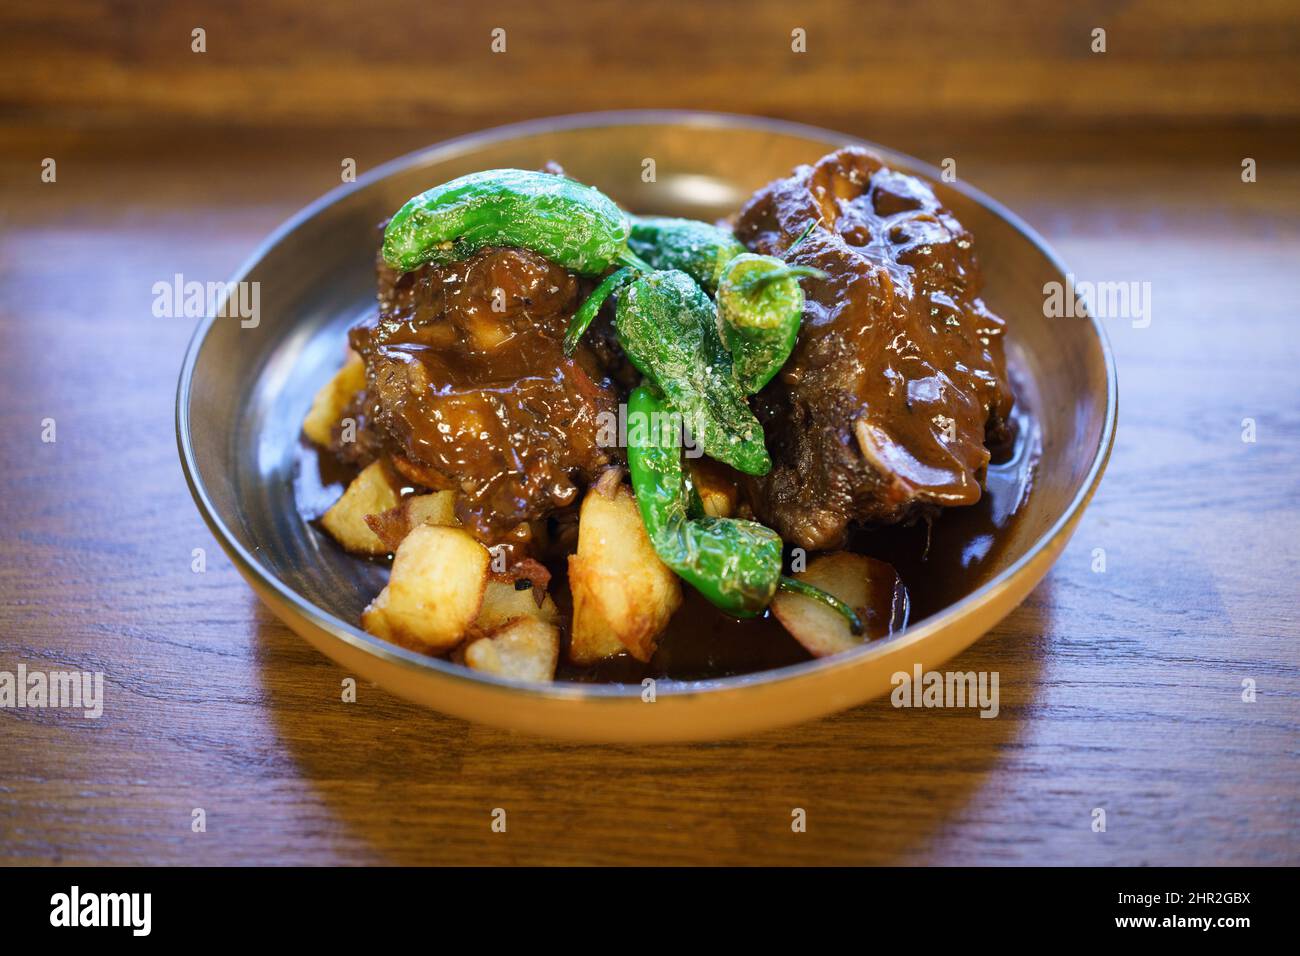 Bull's tail cooked and ready to eat in a Spanish restaurant Stock Photo